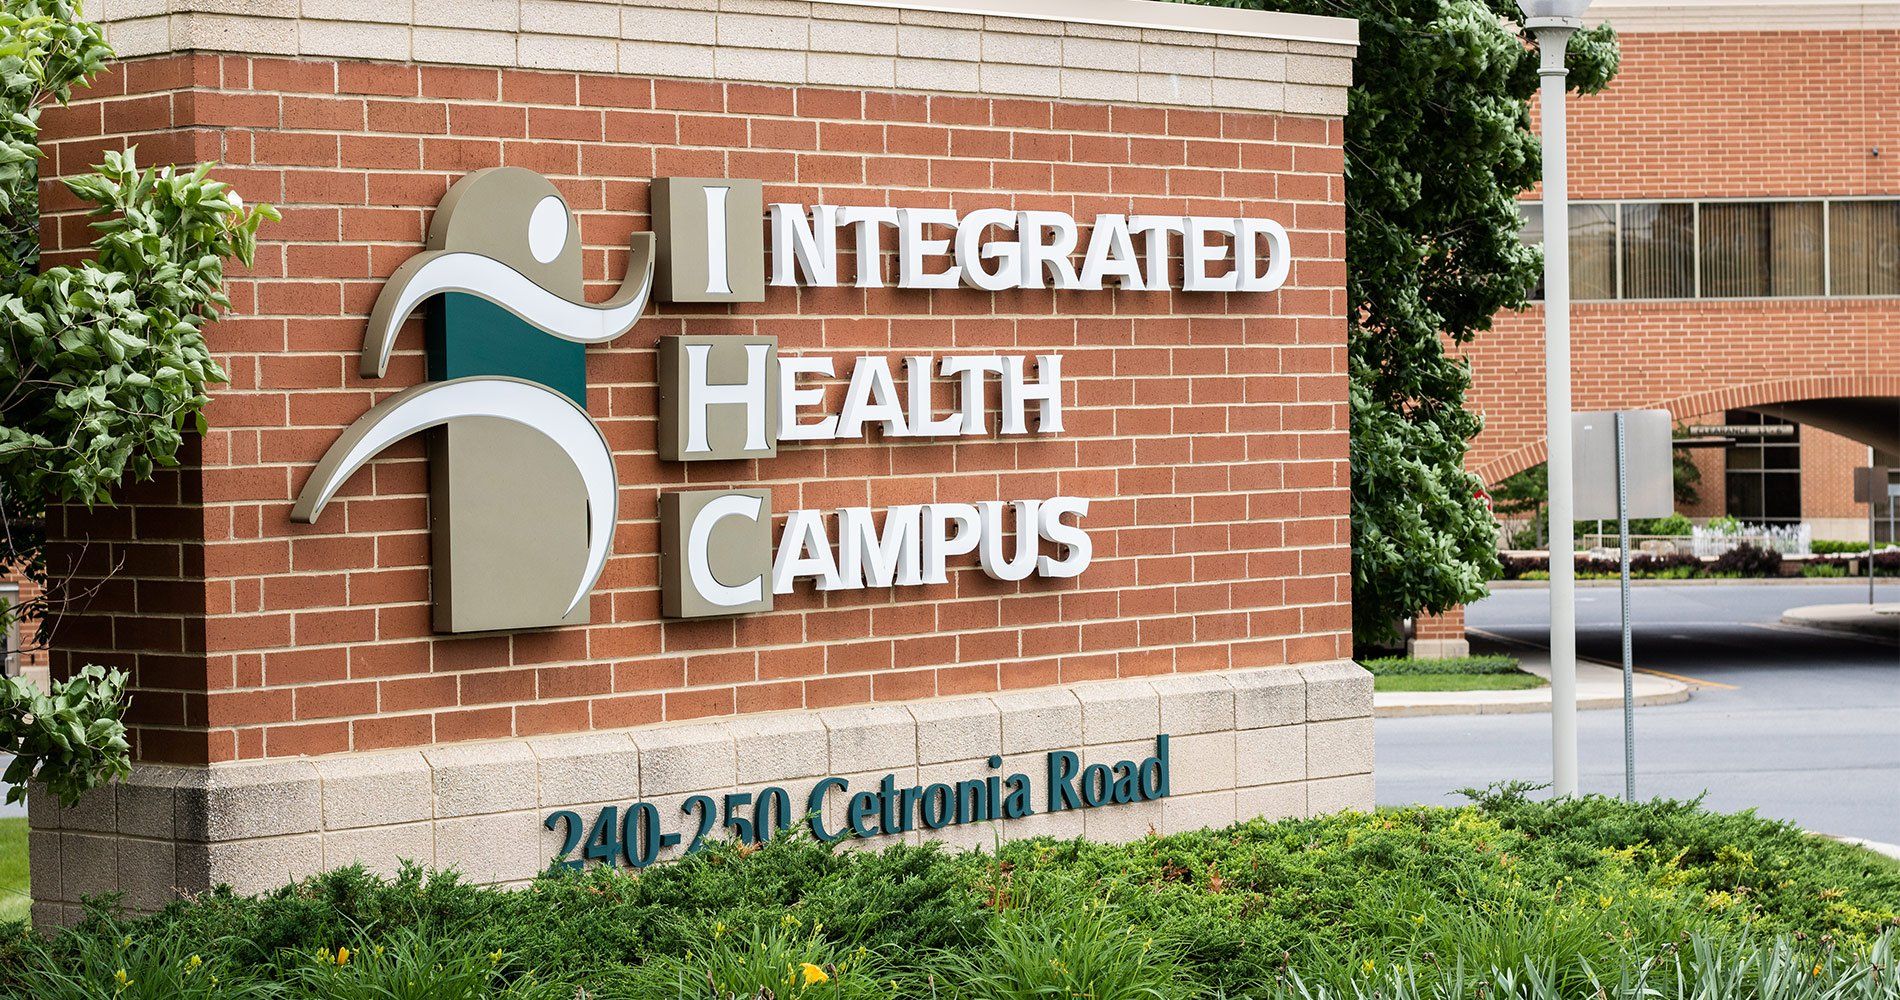 Sign for the Integrated Health Campus where Nurture Dental Health is located